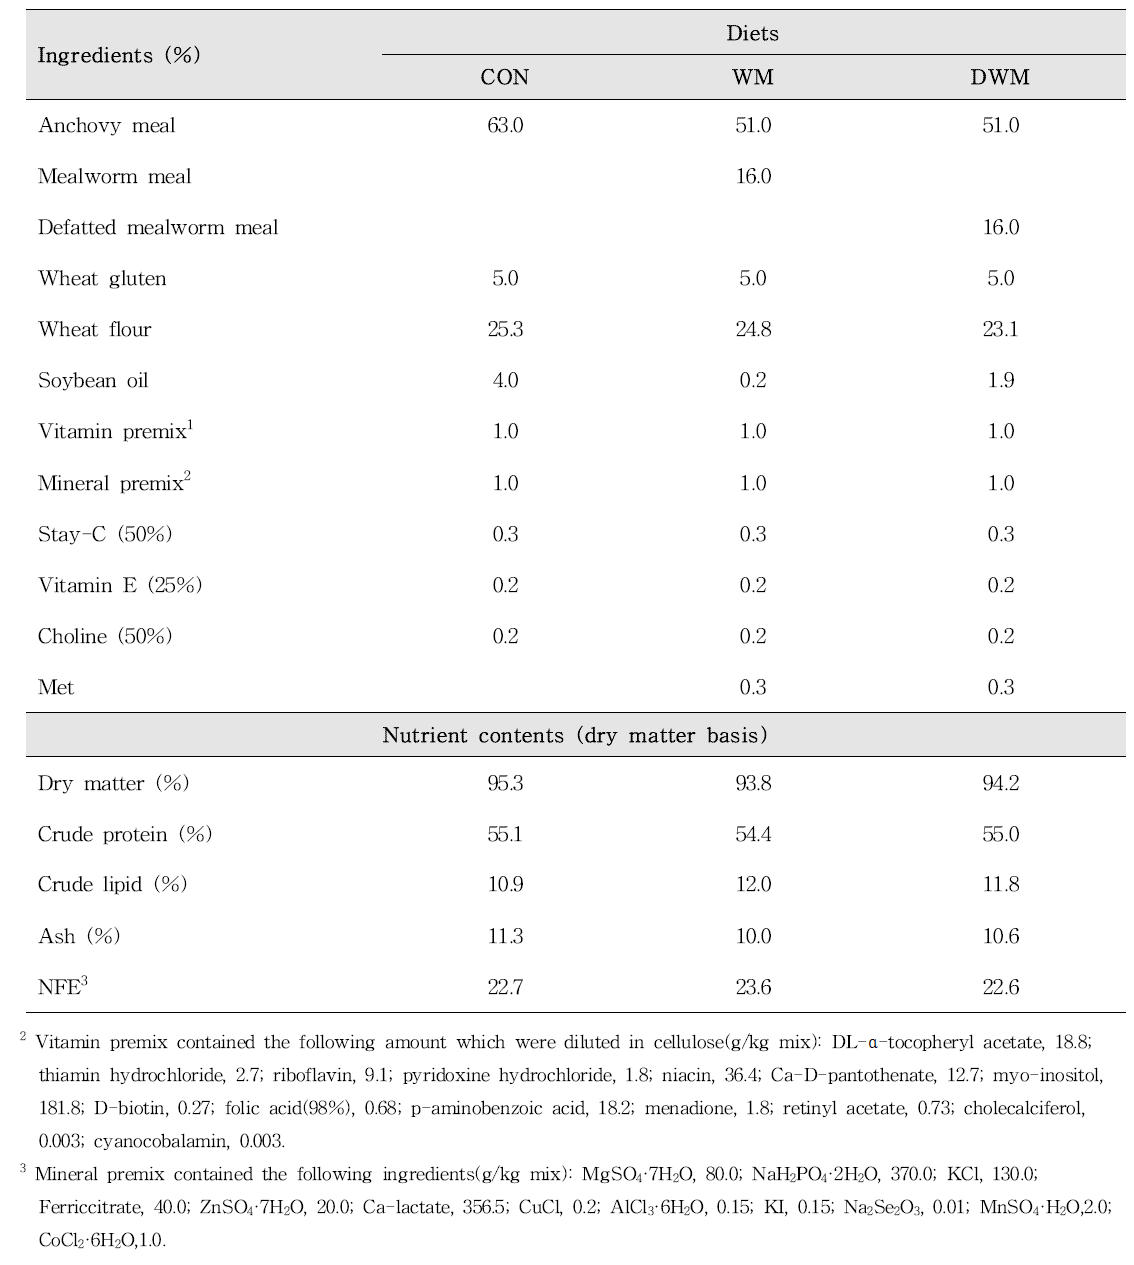 Ingredients and nutrient composition of the experimental diet(%)